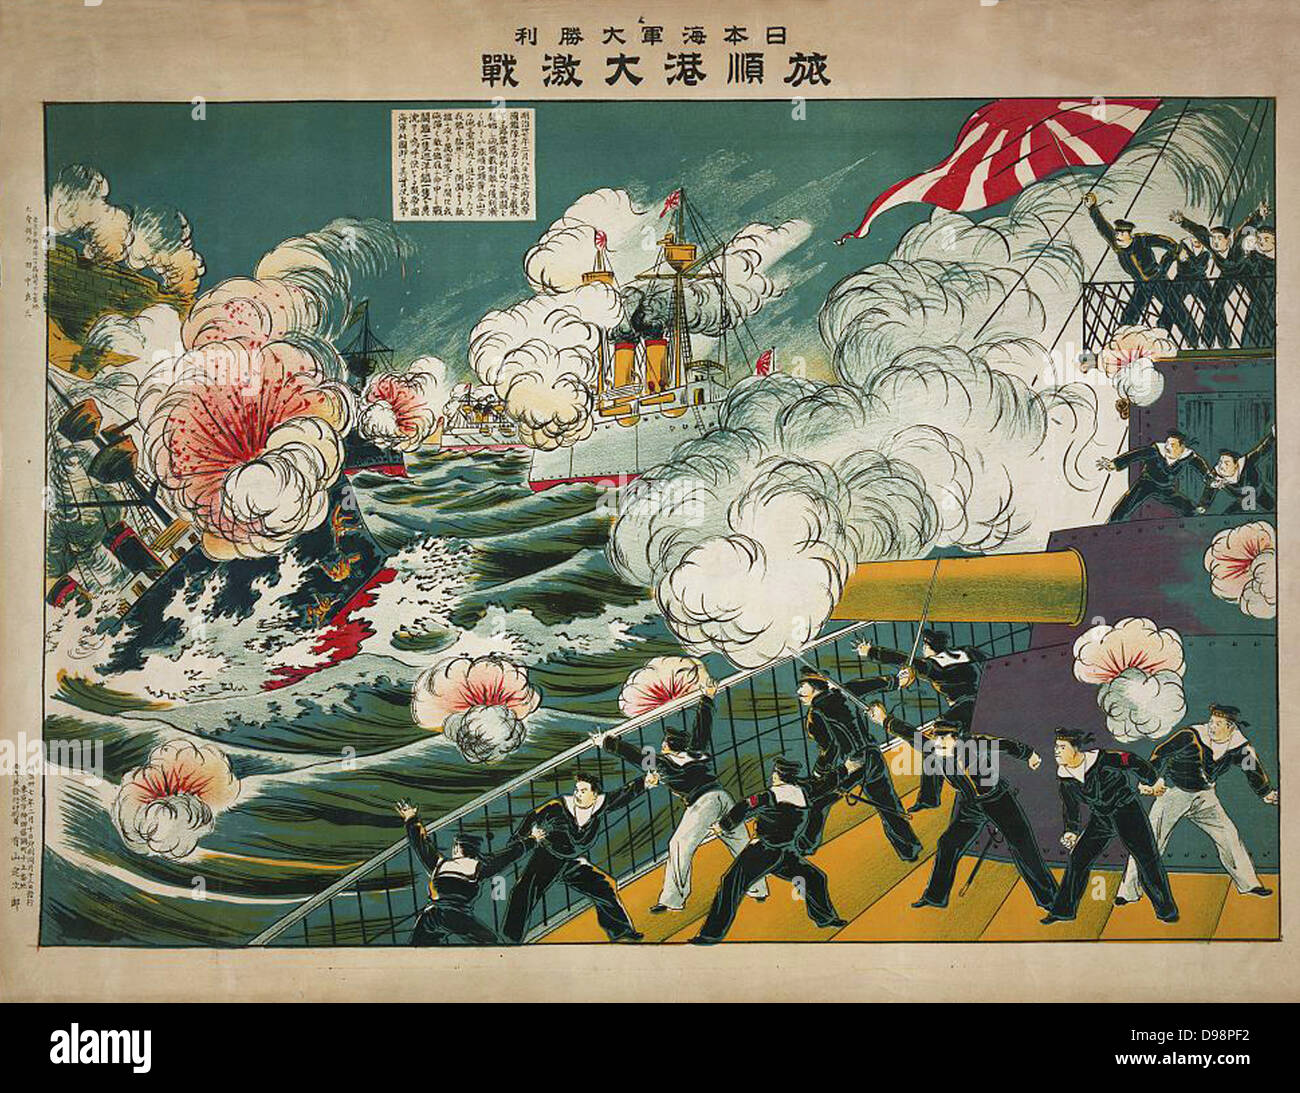 Russo-Japanese War 1904-1905: Scene on deck of Japanese warship during surprise attack on the Russian fleet at Port Arthur (Lushun) 8 February 1904, battle inconclusive. Japanese Print 1904 . Naval Bombardment Warship Stock Photo